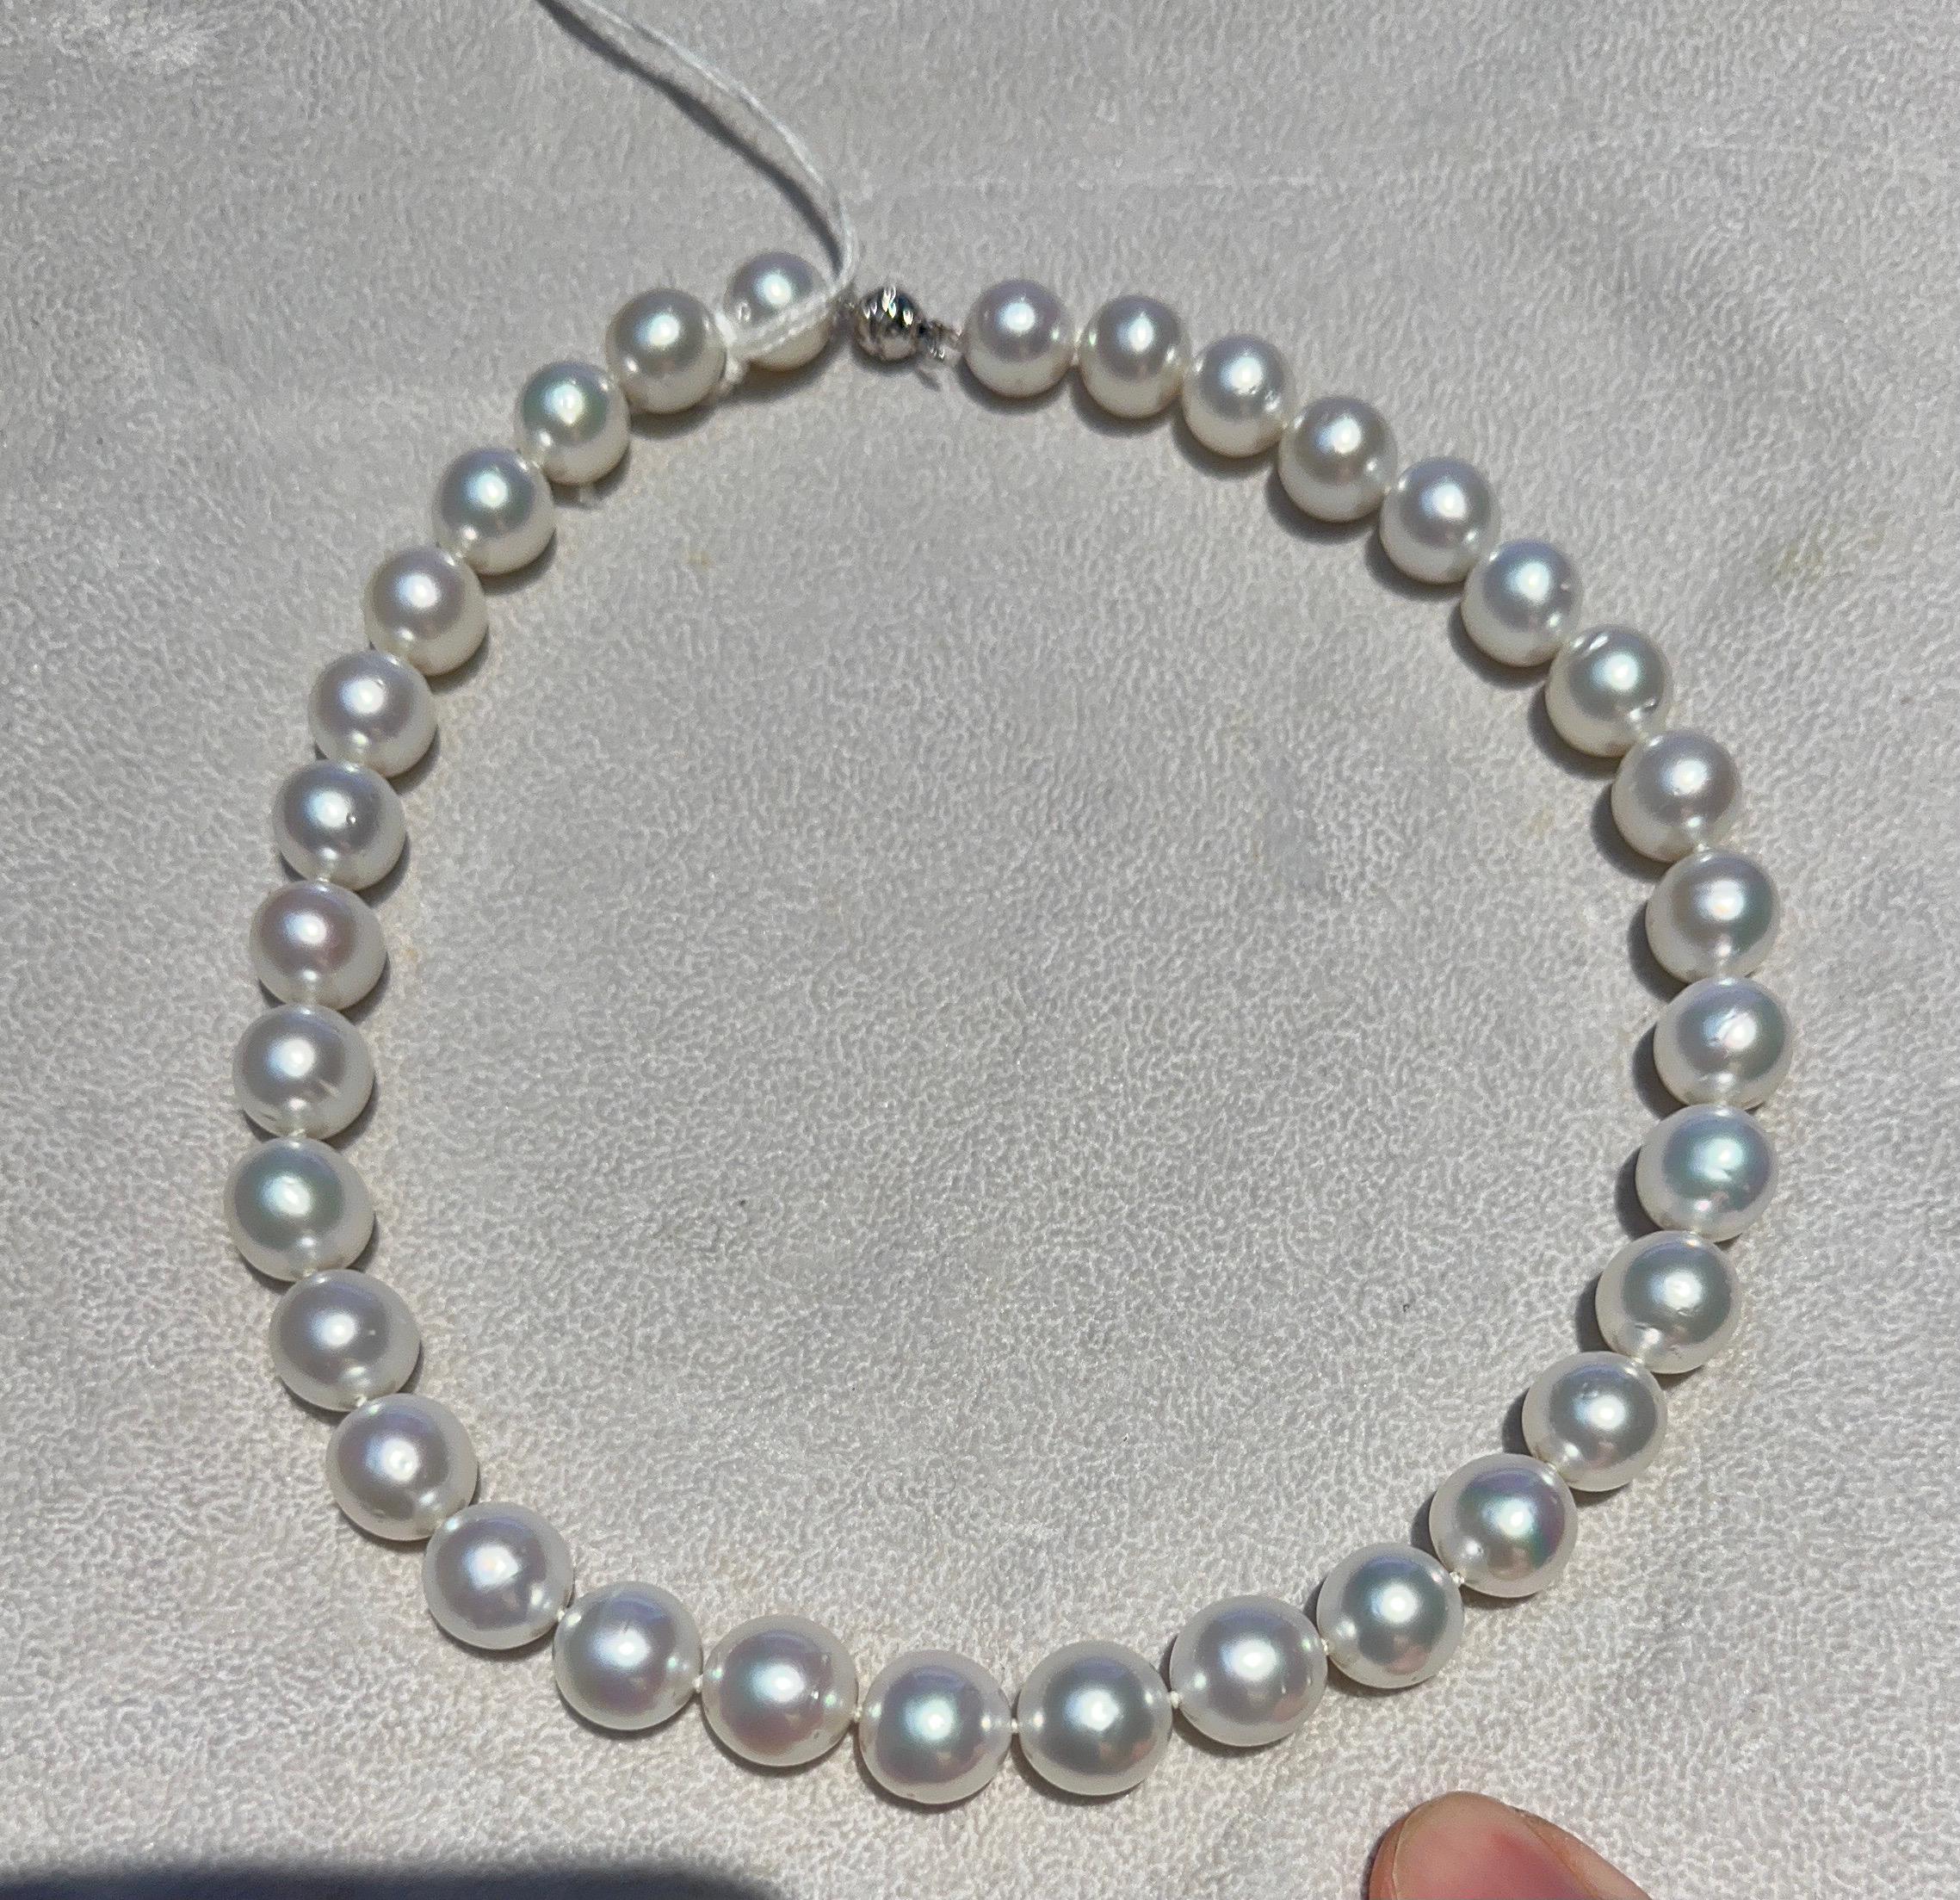 


A strand of Cultured Australian South Sea pearls


GUARANTEED NATURAL COLOUR AND LUSTRE

These pearls display their natural colour and lustre and have not been subjected to chemical enhancements or processes.
SUSTAINABLE

Australian South Sea